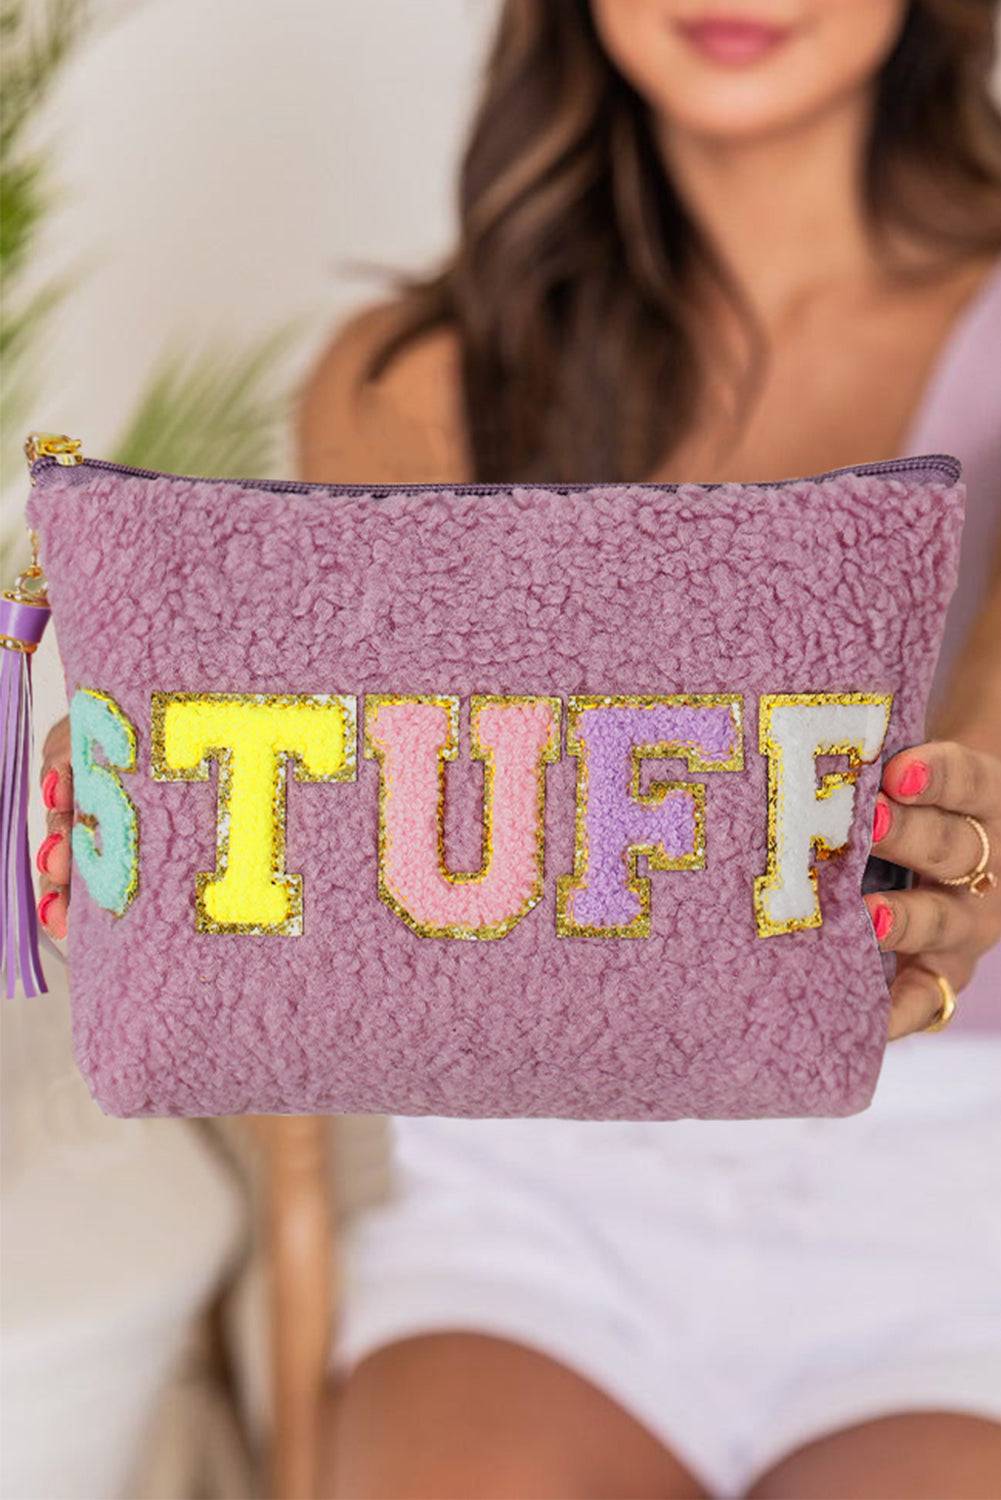 a woman holding a purple purse with the word stuff on it